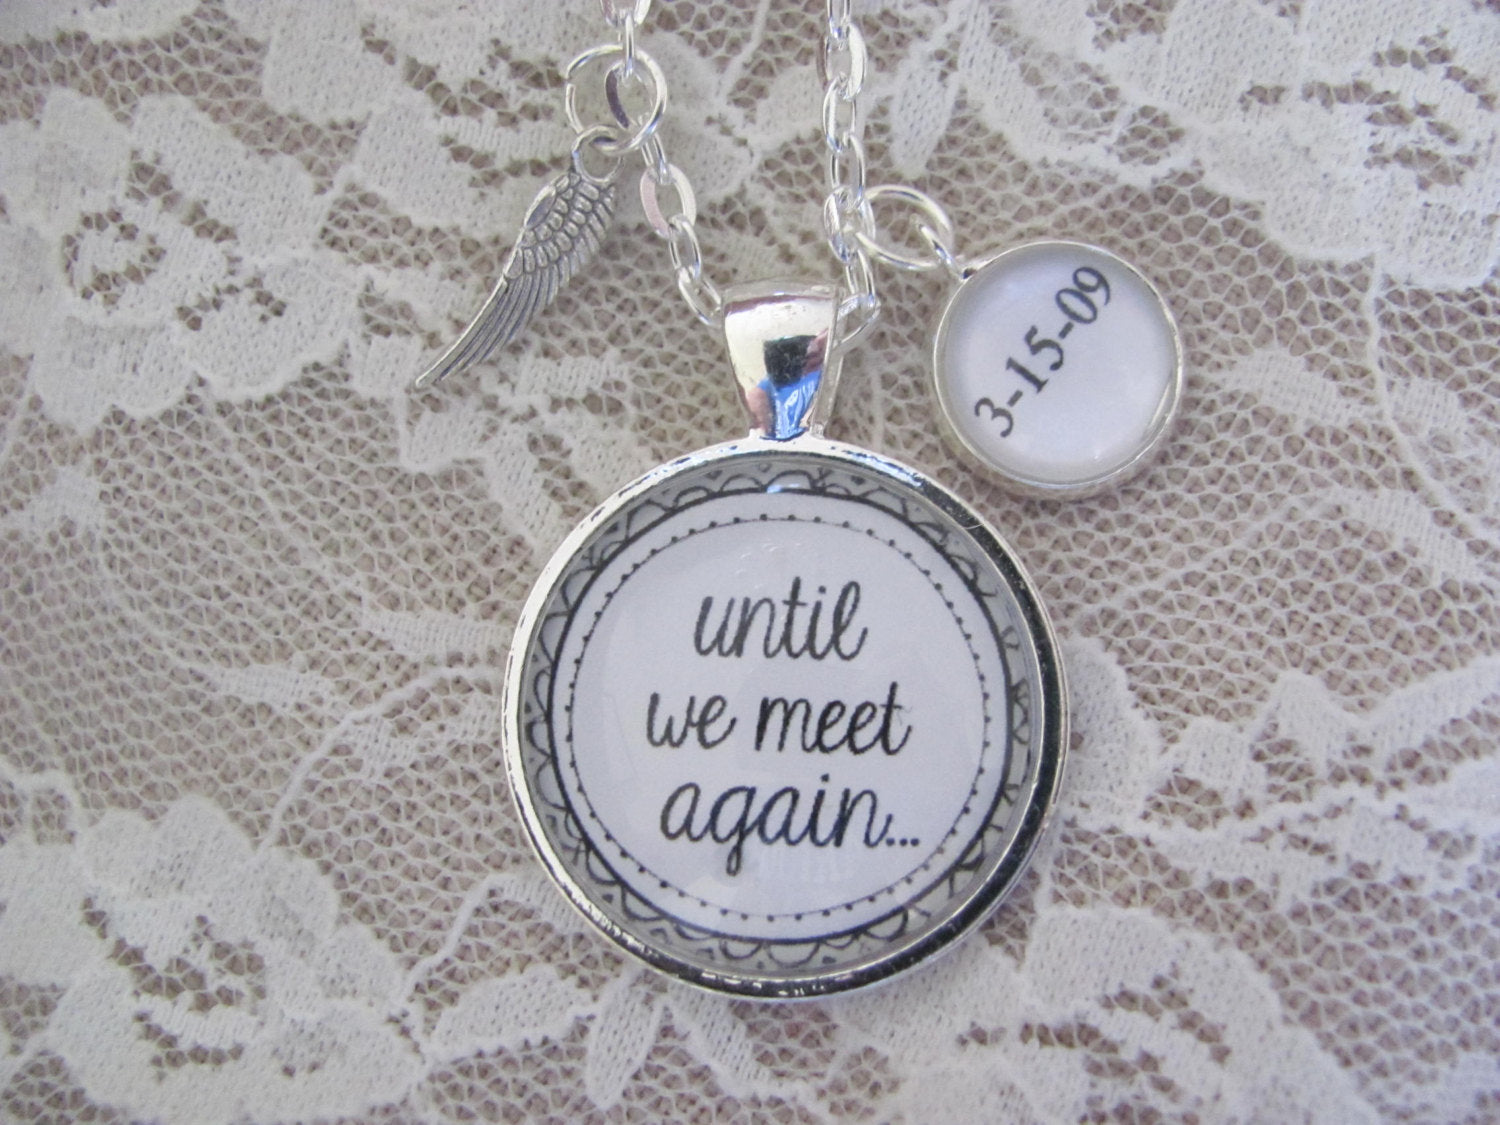 Pendant Necklace "Until we meet again" - Redeemed Jewelry